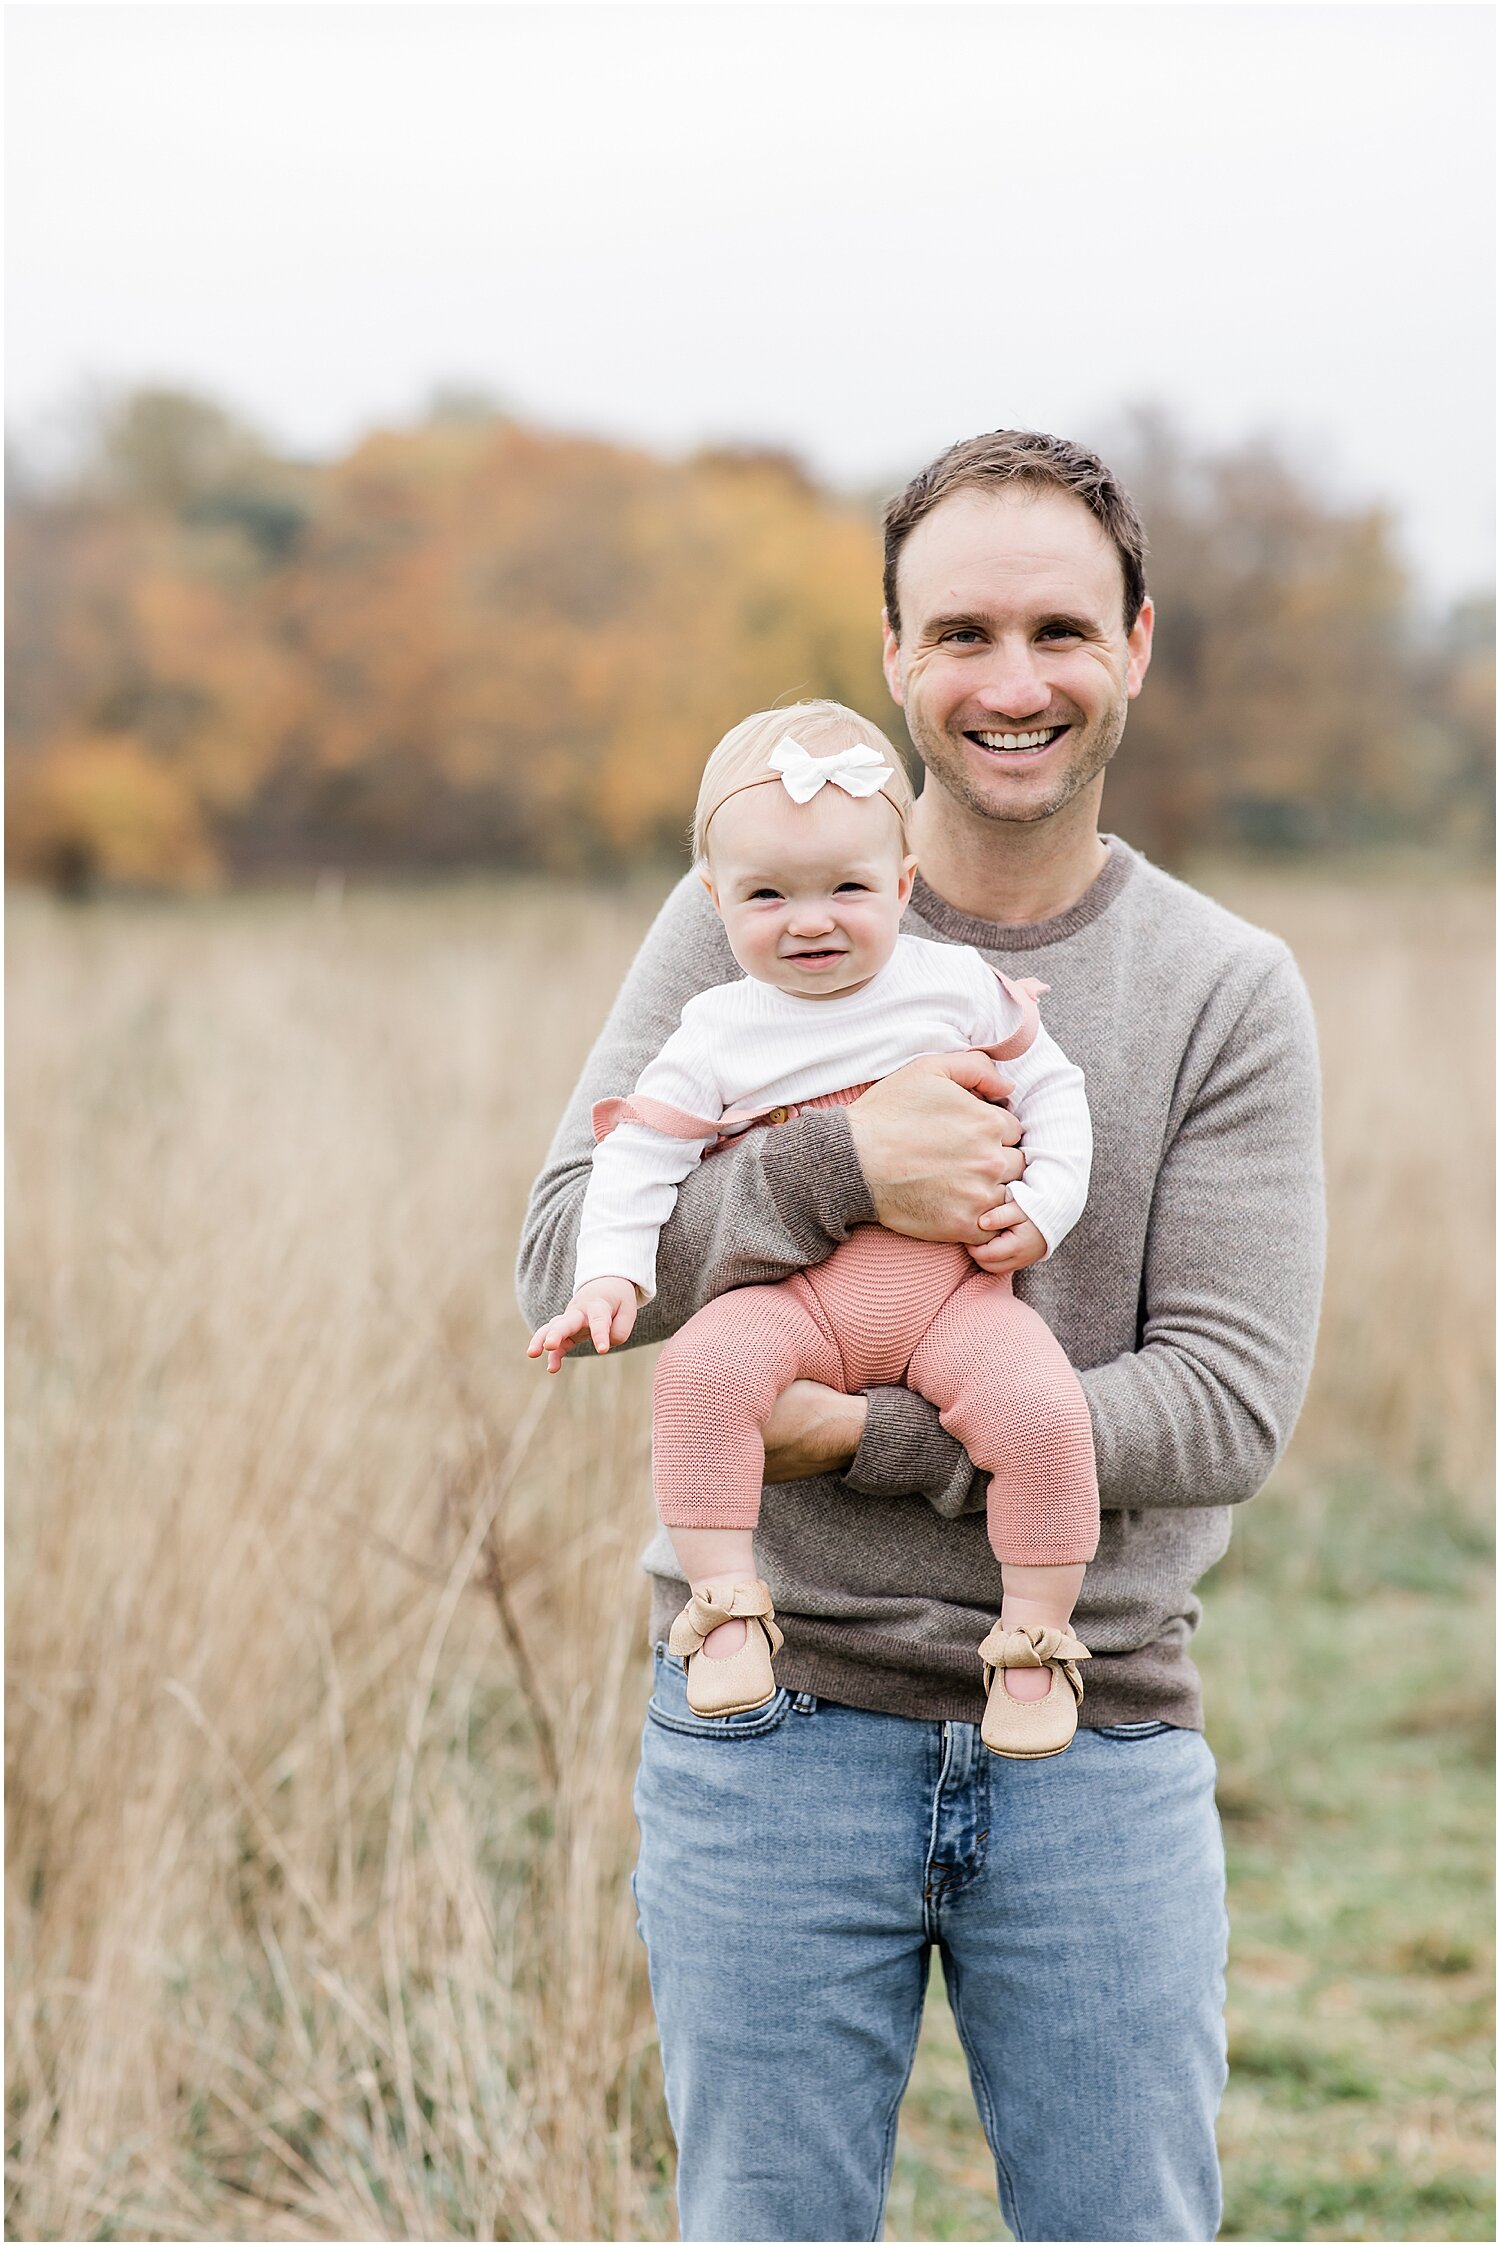 Daddy and baby girl at first birthday photoshoot in New Canaan, CT. Photos by CT Family Photographer, Kristin Wood Photography.